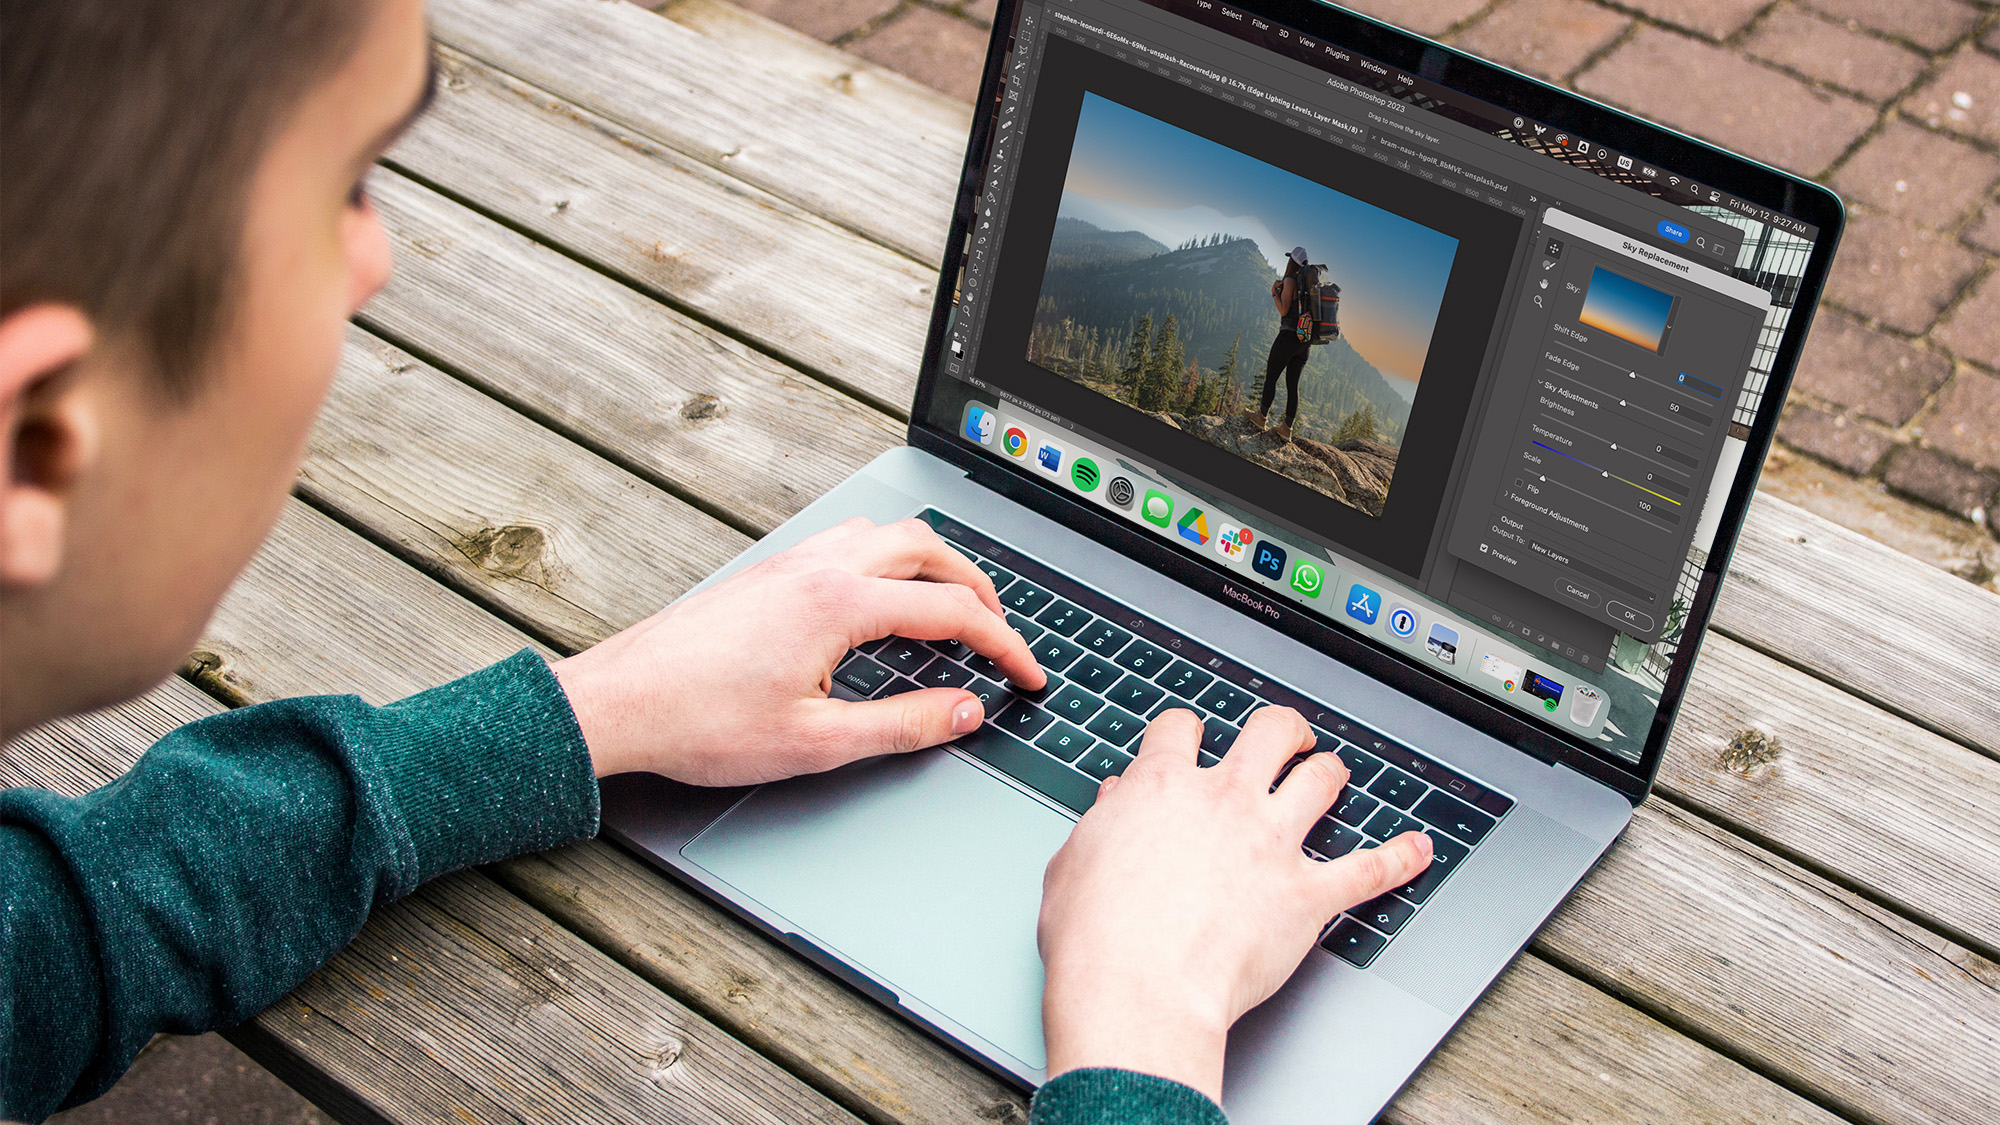 A person typing on a laptop and editing on photoshop.